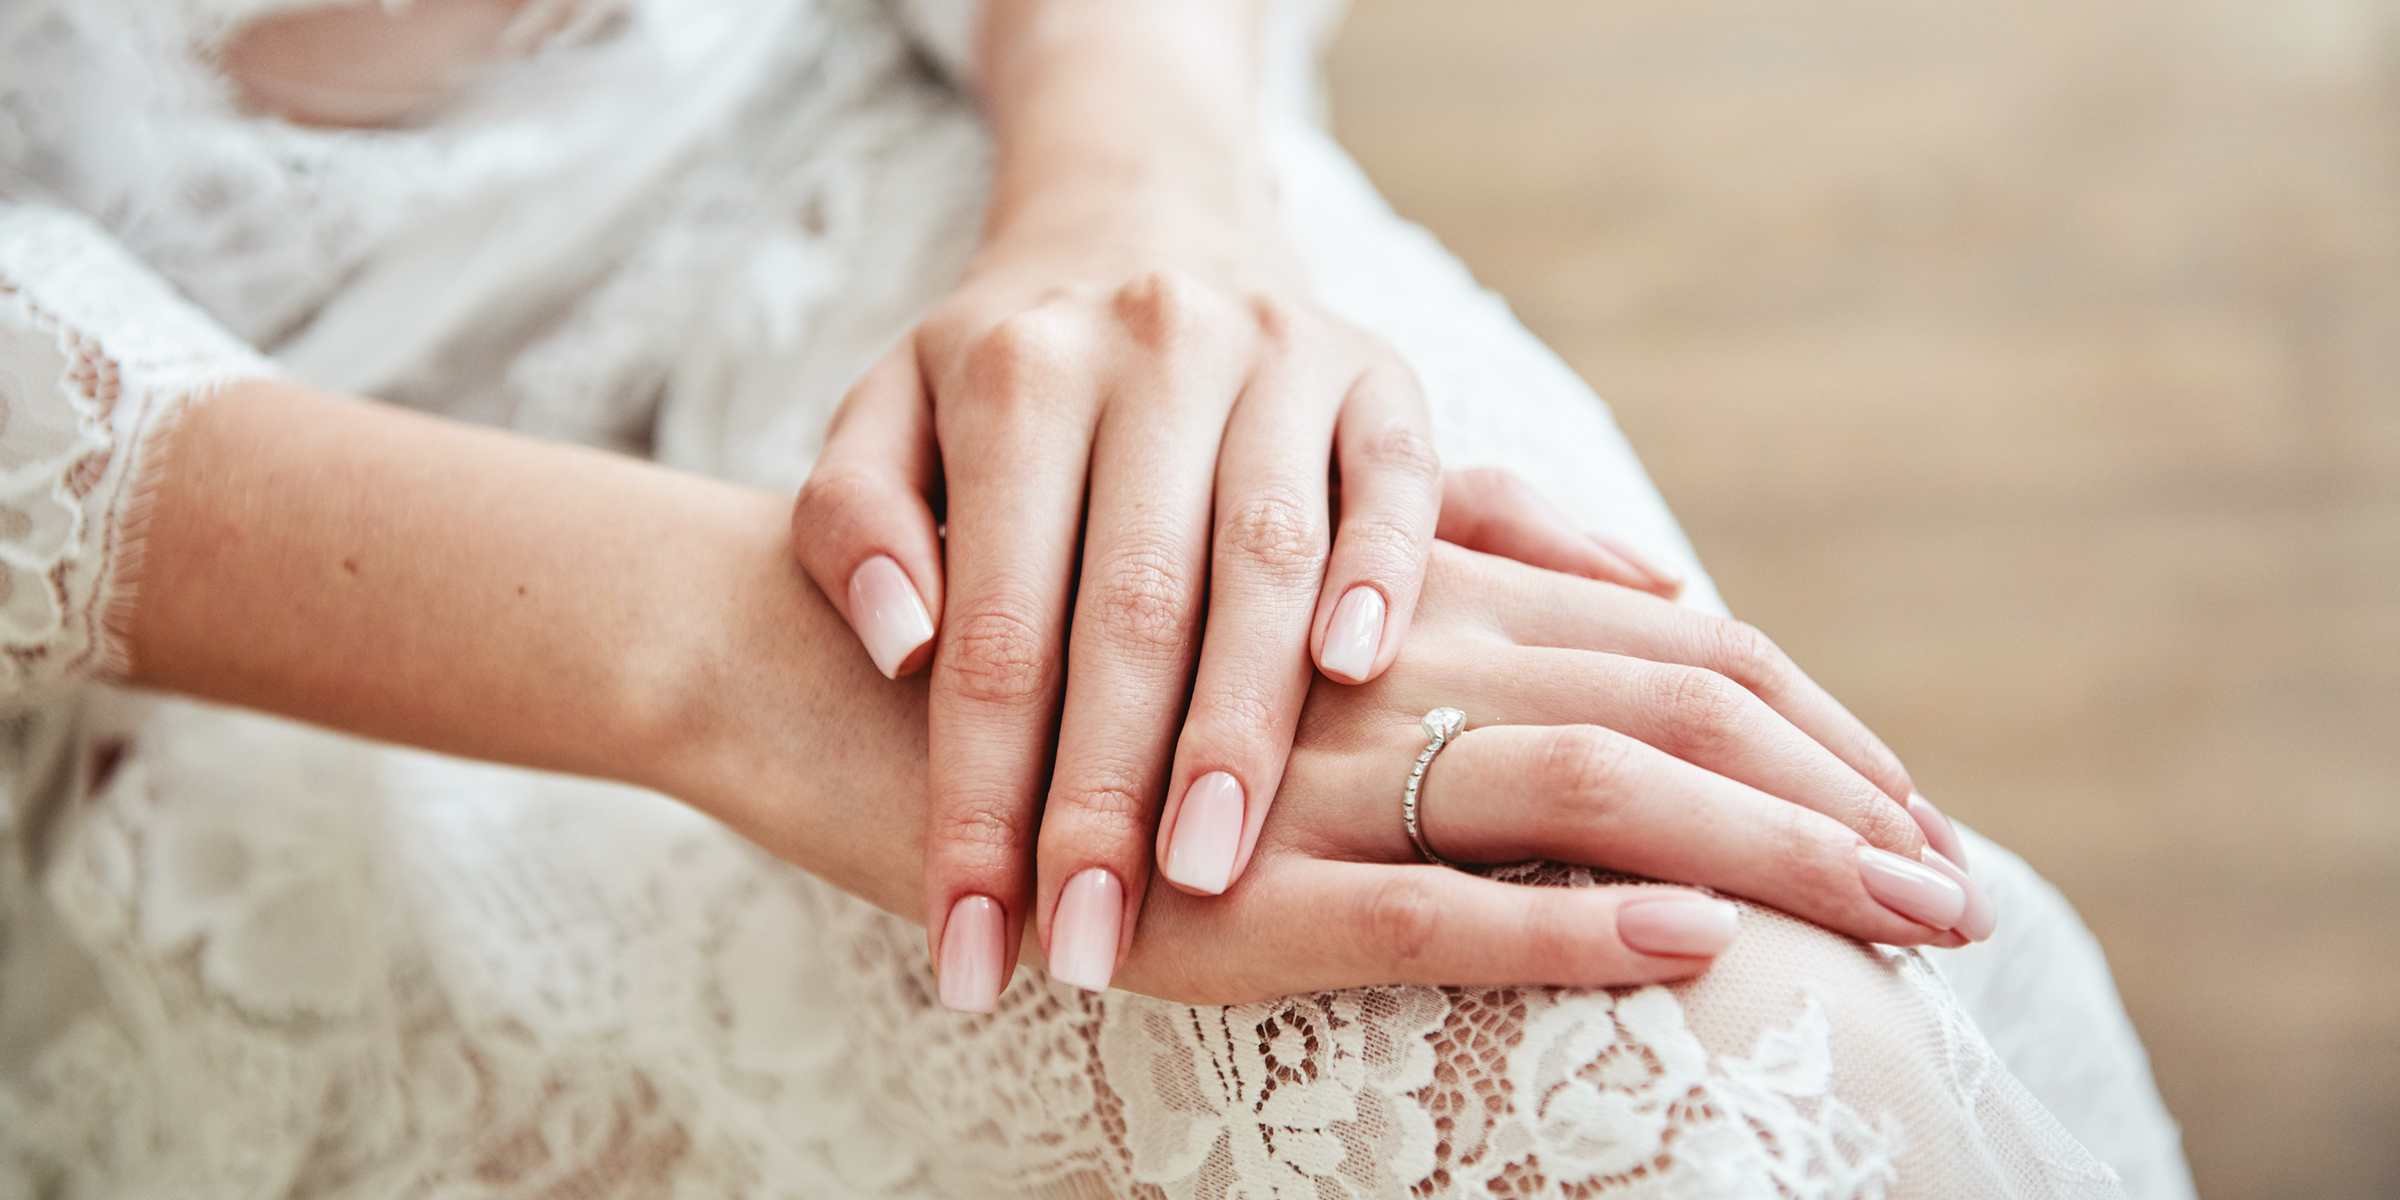 A bride's hands. | Source: Getty Images